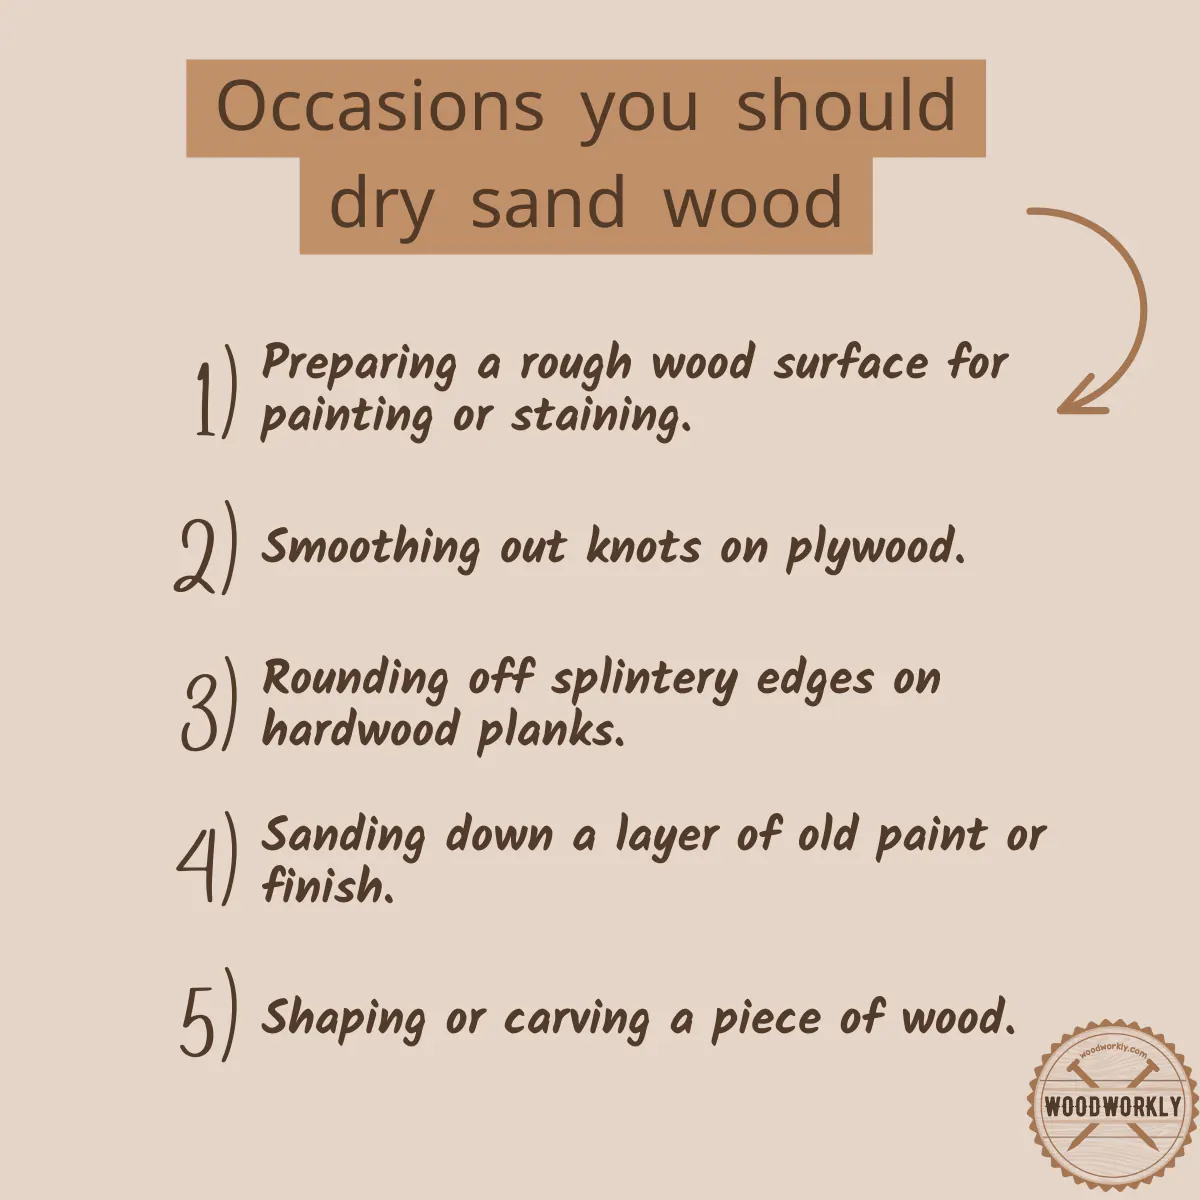 Occasions you should dry sand wood